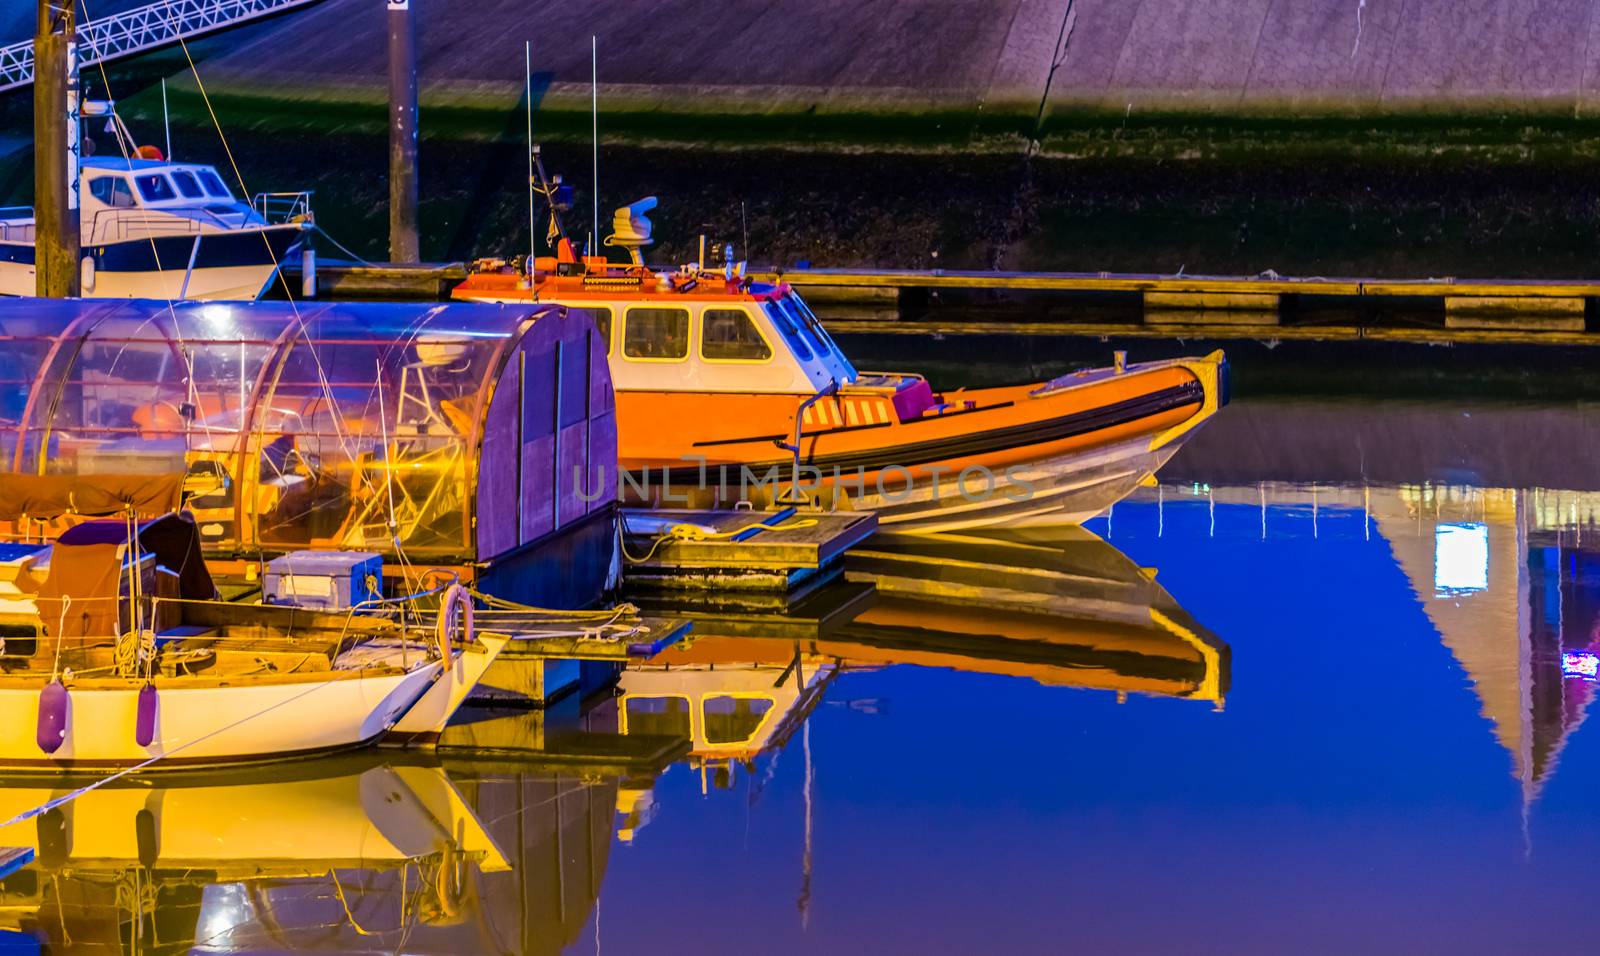 Boats docked in the harbor of Blankenberge at night, Belgium city architecture, water transportation